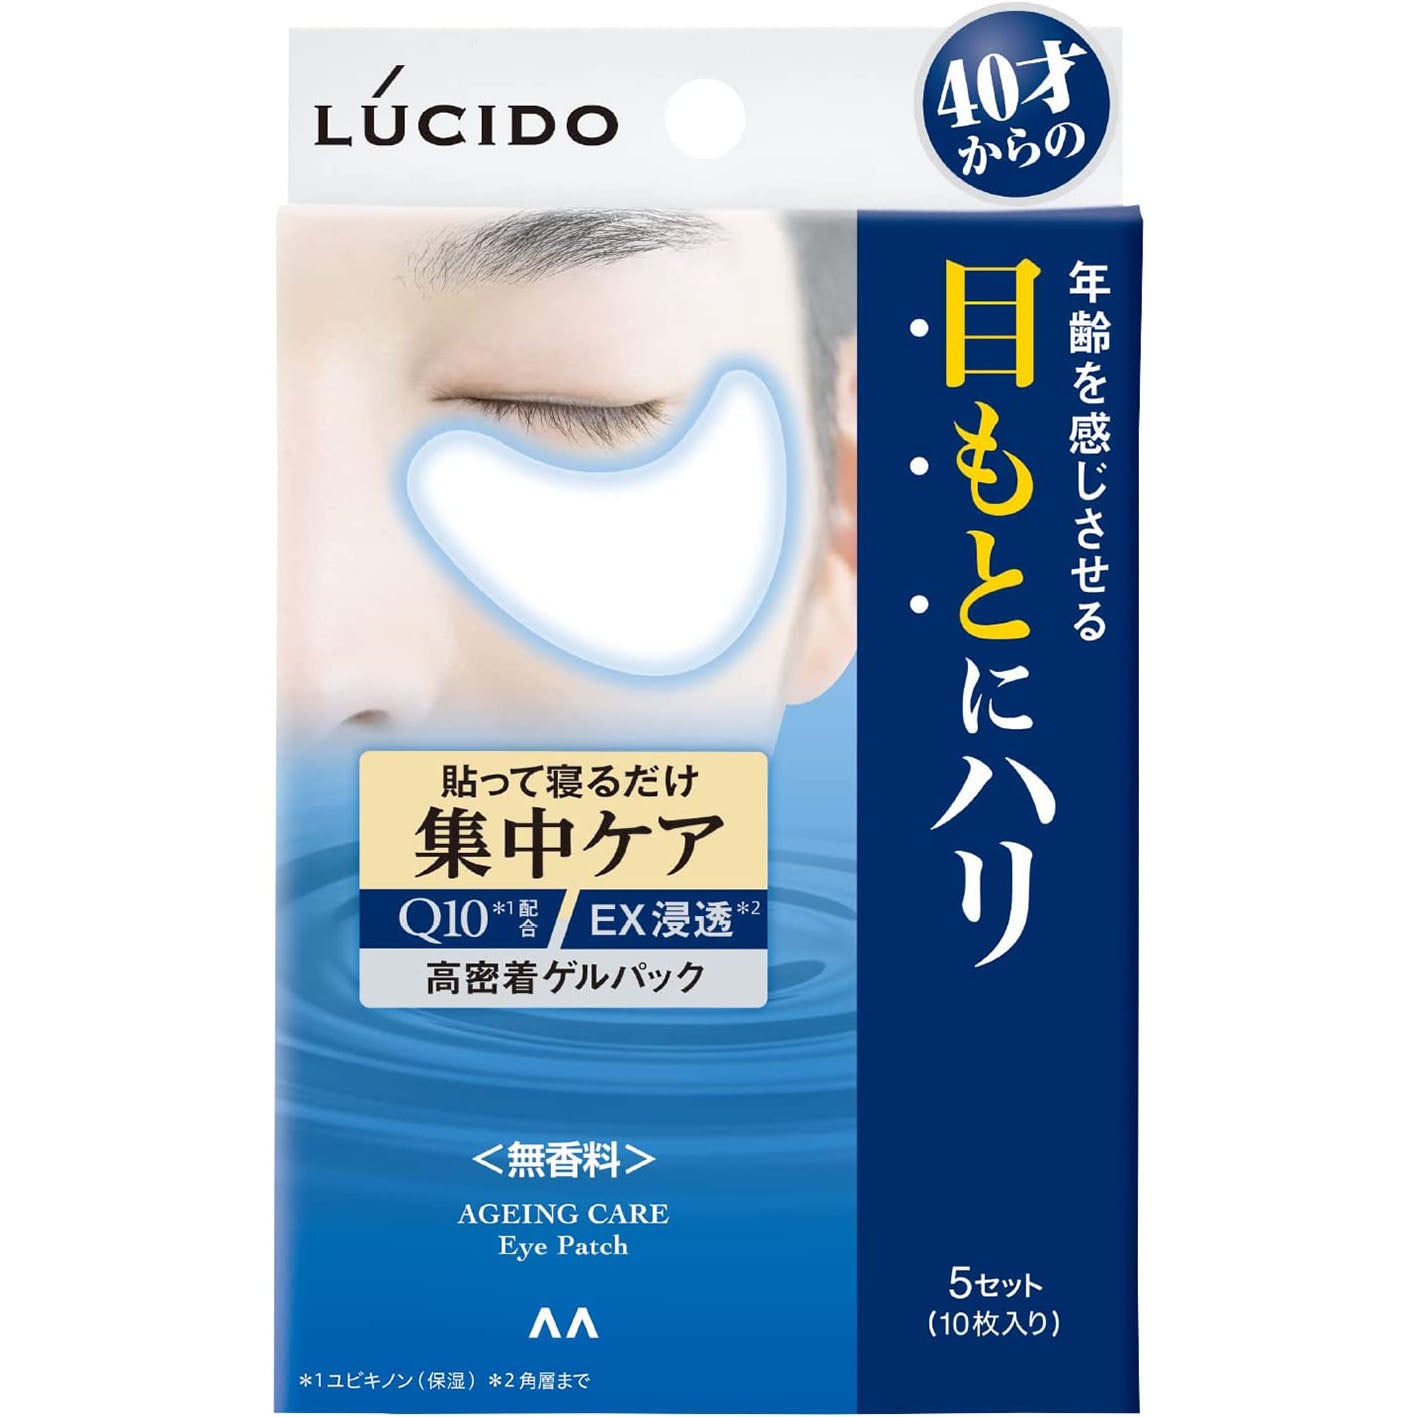 Lucido Intensive Eye Care Pack 10pcs - Harajuku Culture Japan - Japanease Products Store Beauty and Stationery